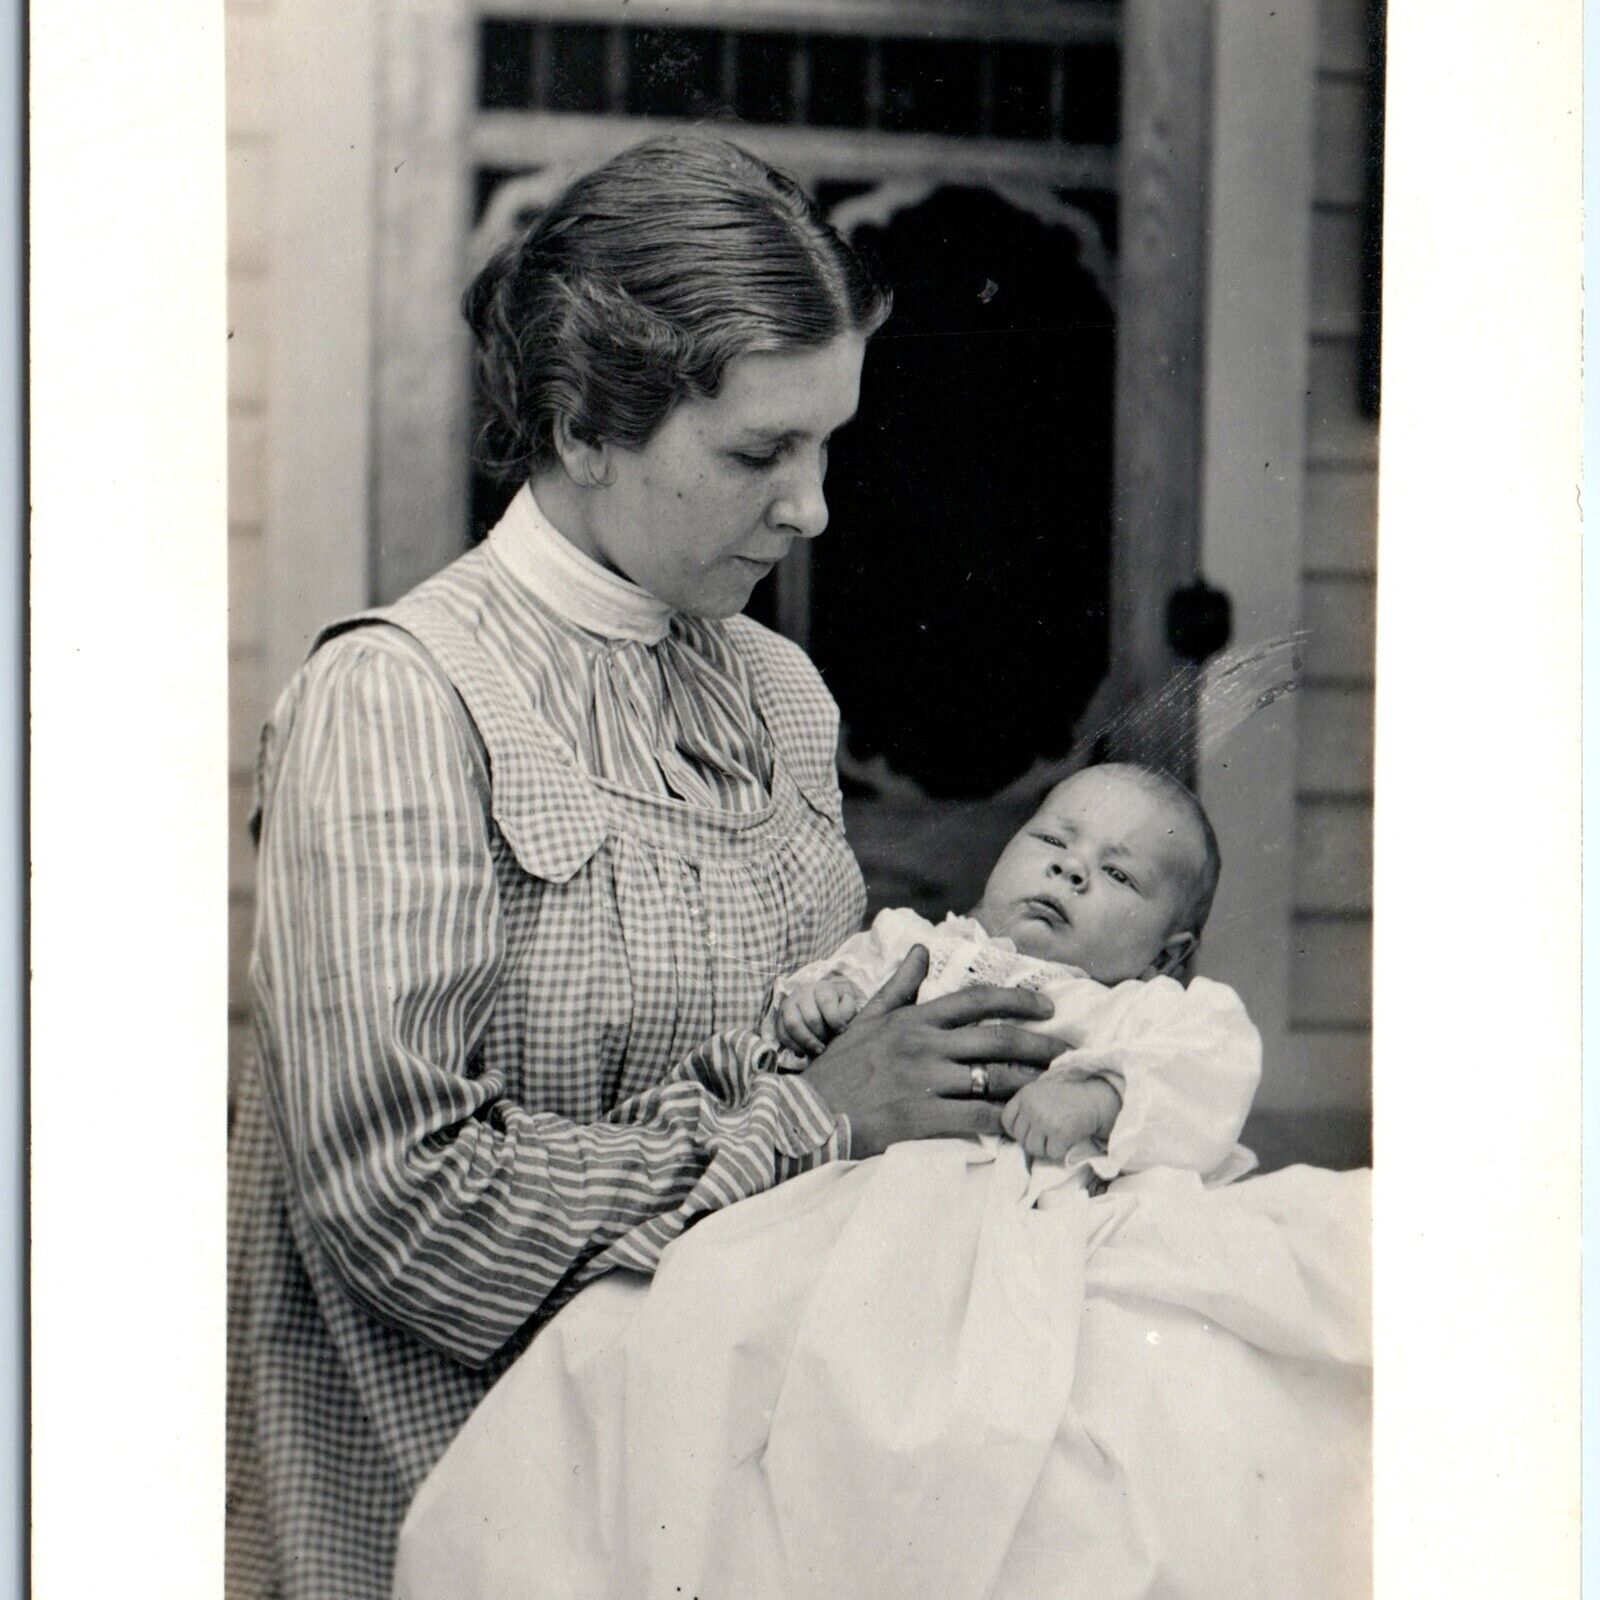 c1910s Beautiful Mother & Lookalike Baby Boy RPPC Cute House Real Photo PC A185